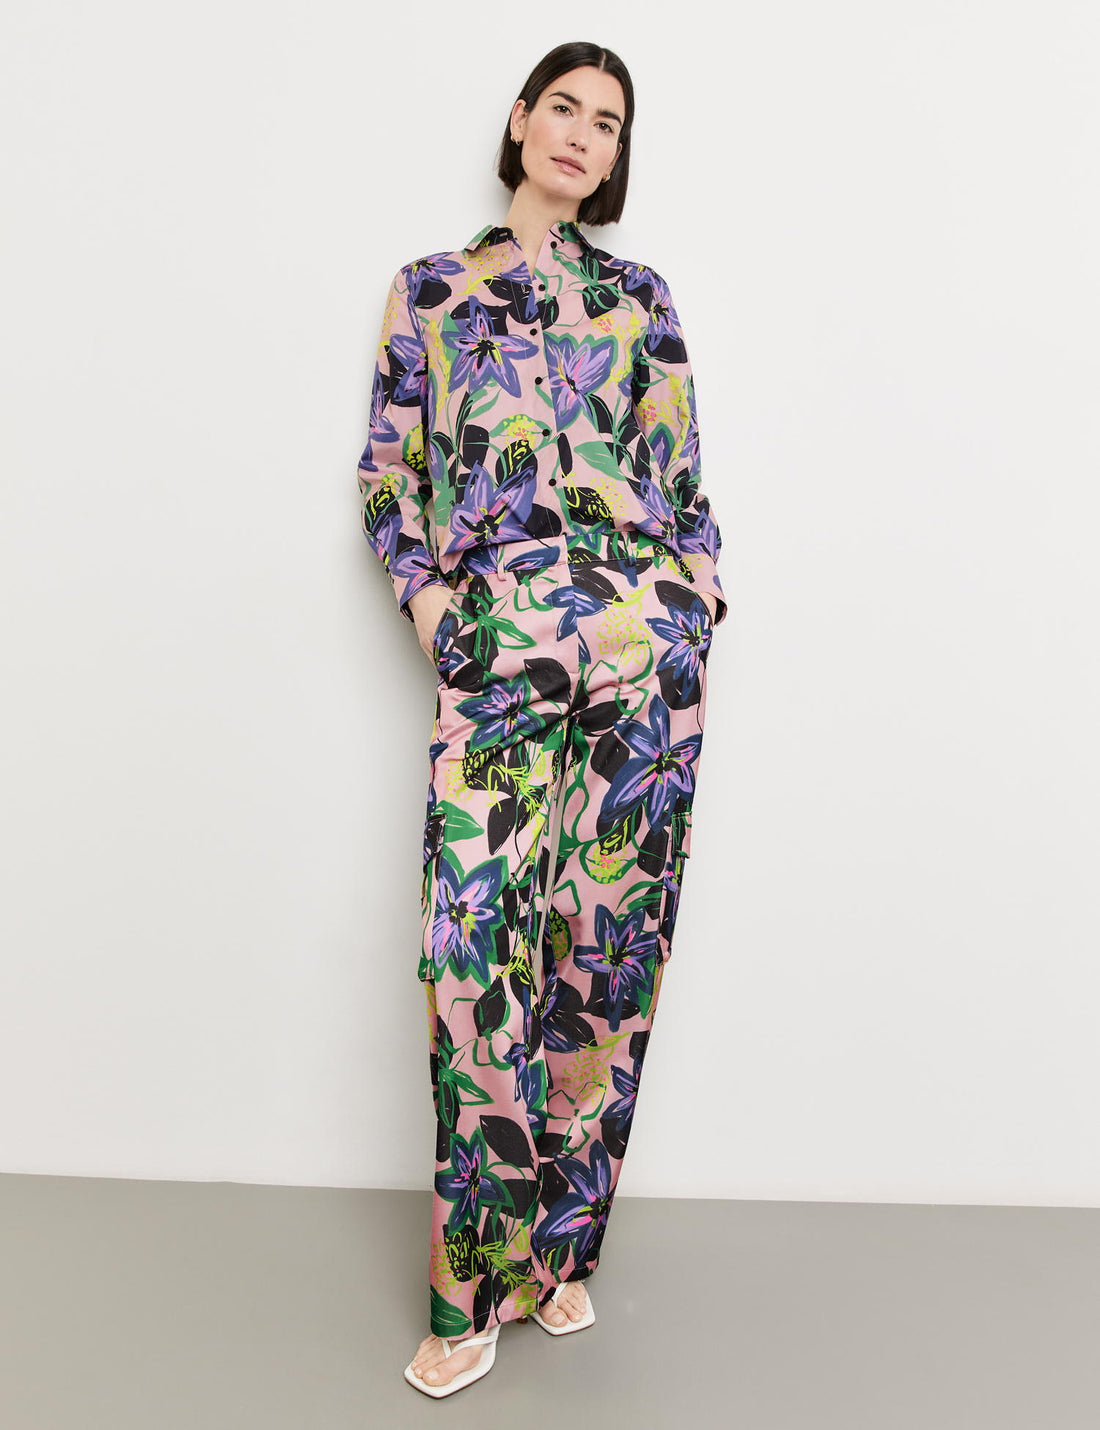 Cargo Trousers With A Floral Pattern_320015-31243_3058_01